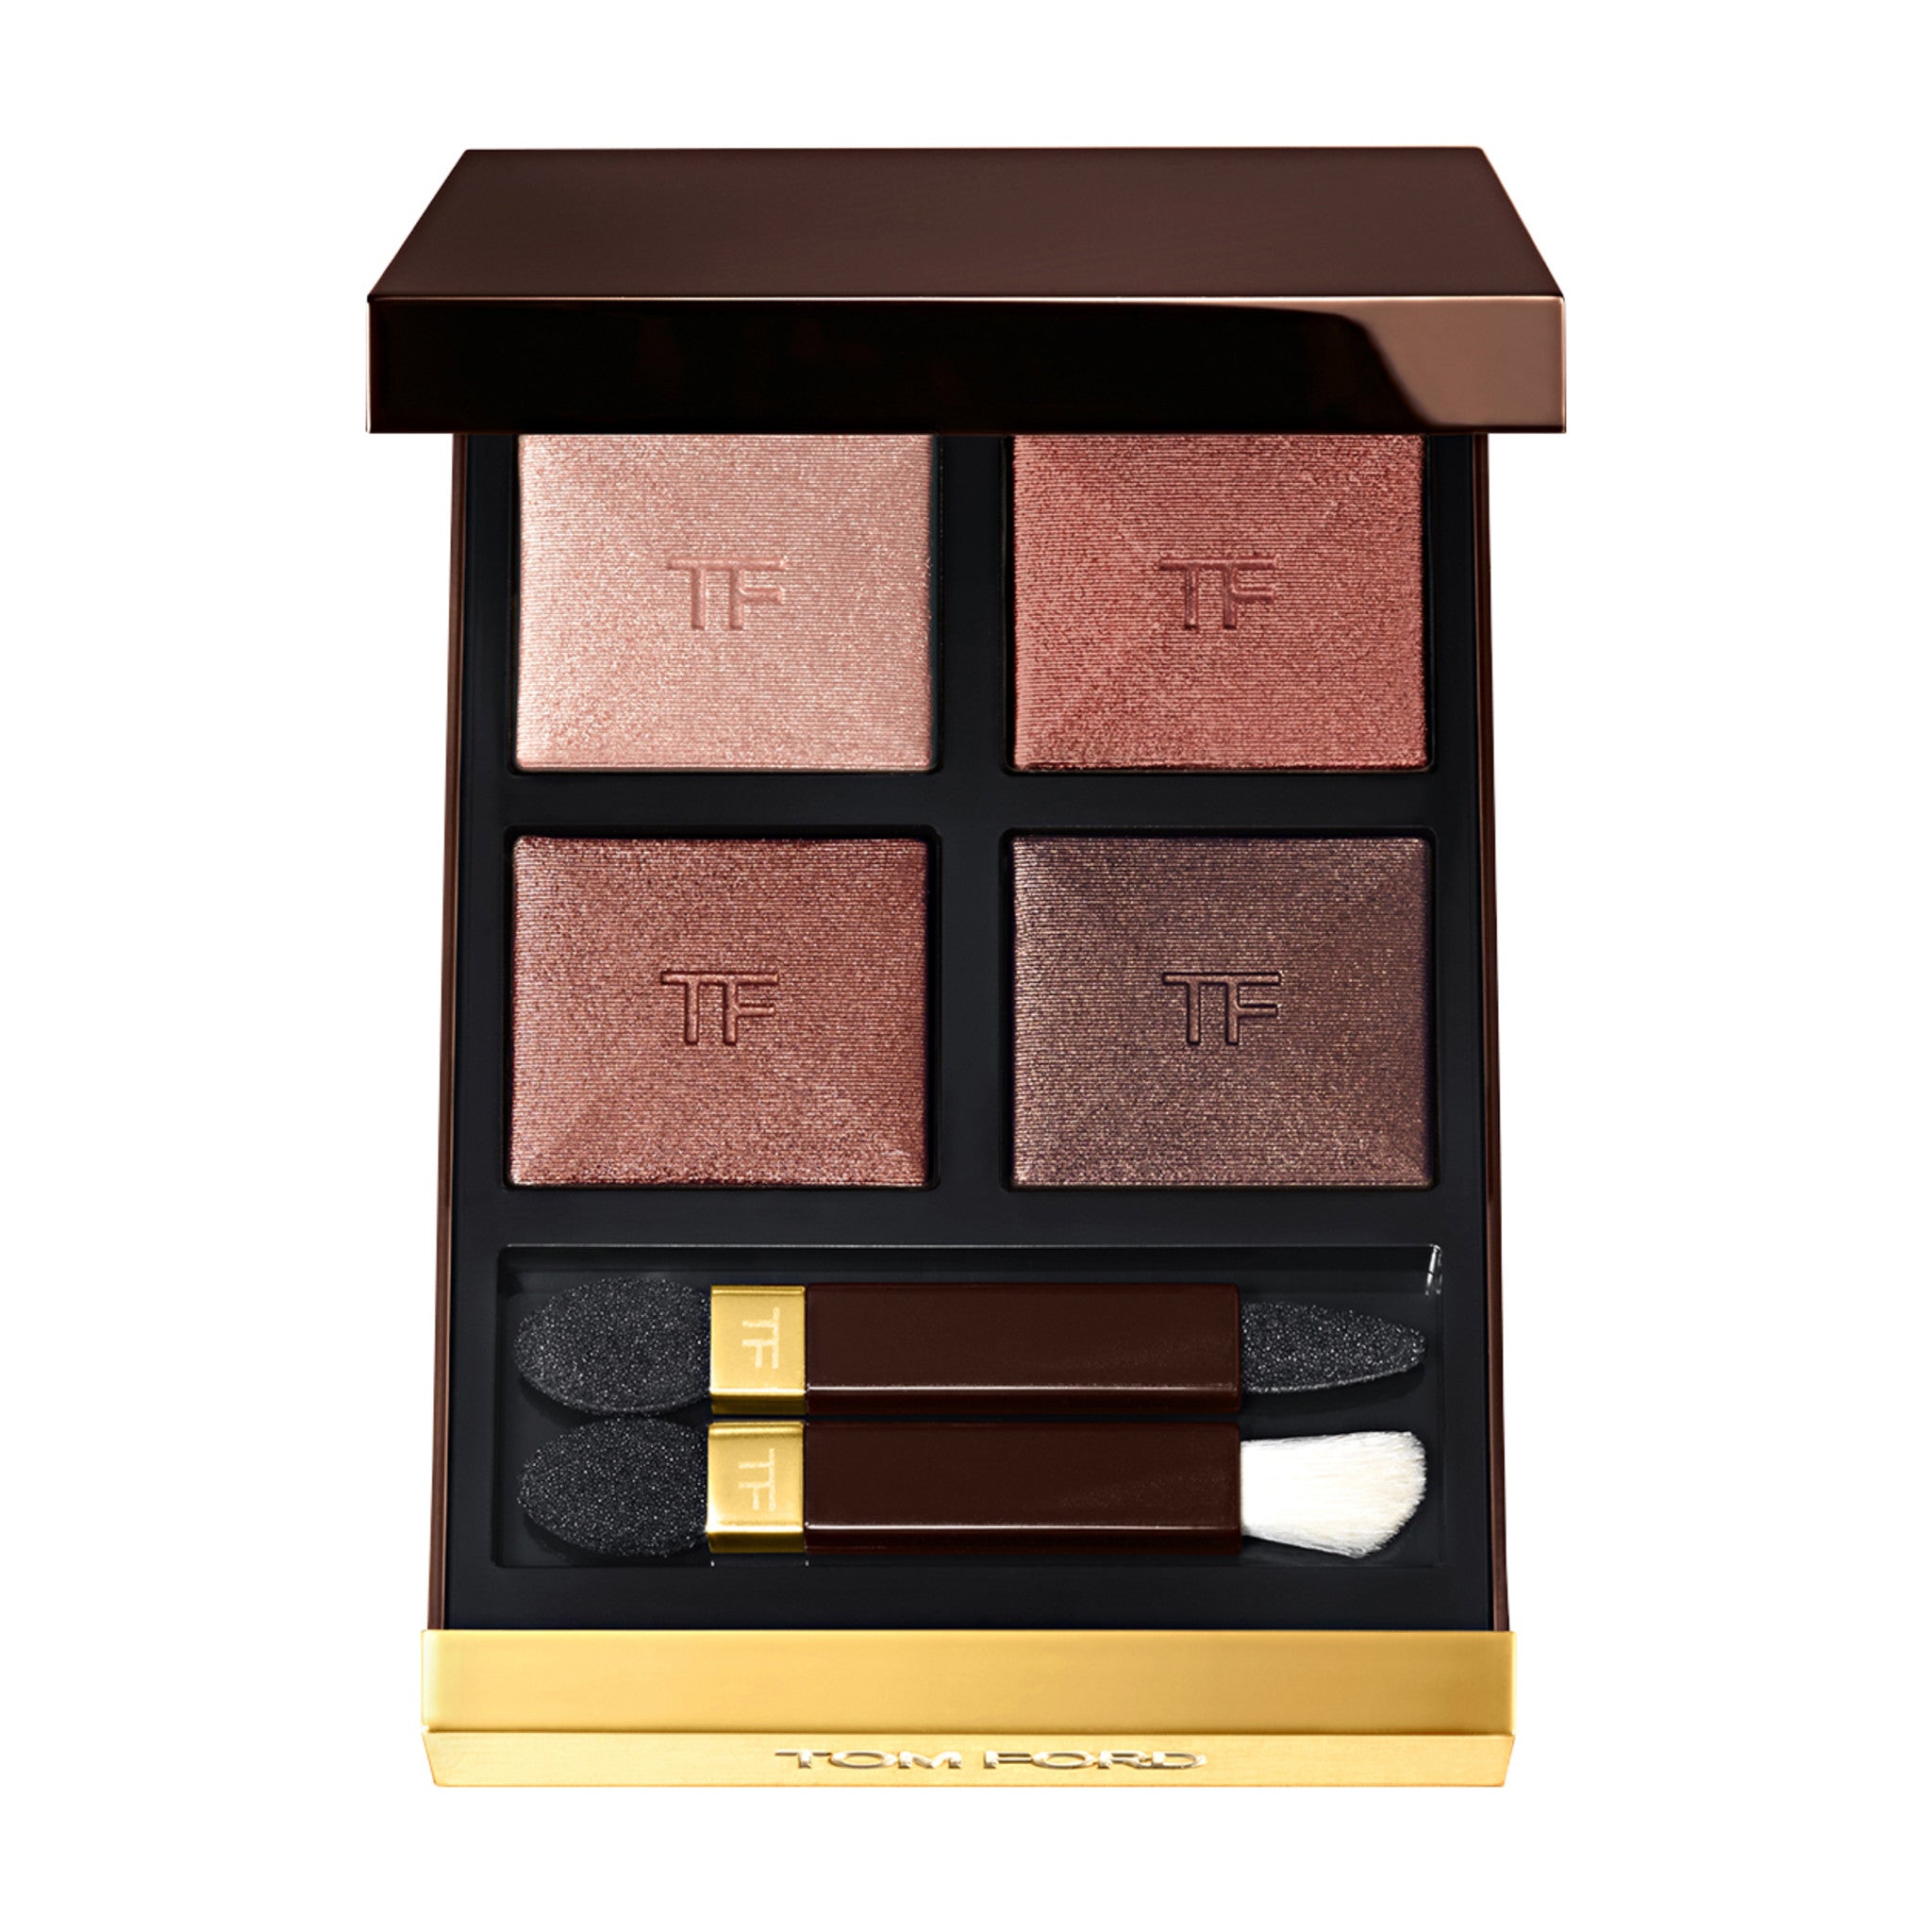 Tom Ford Eye Color Quad Eyeshadow Color/Shade variant: Body Heat main image. This product is in the color nude